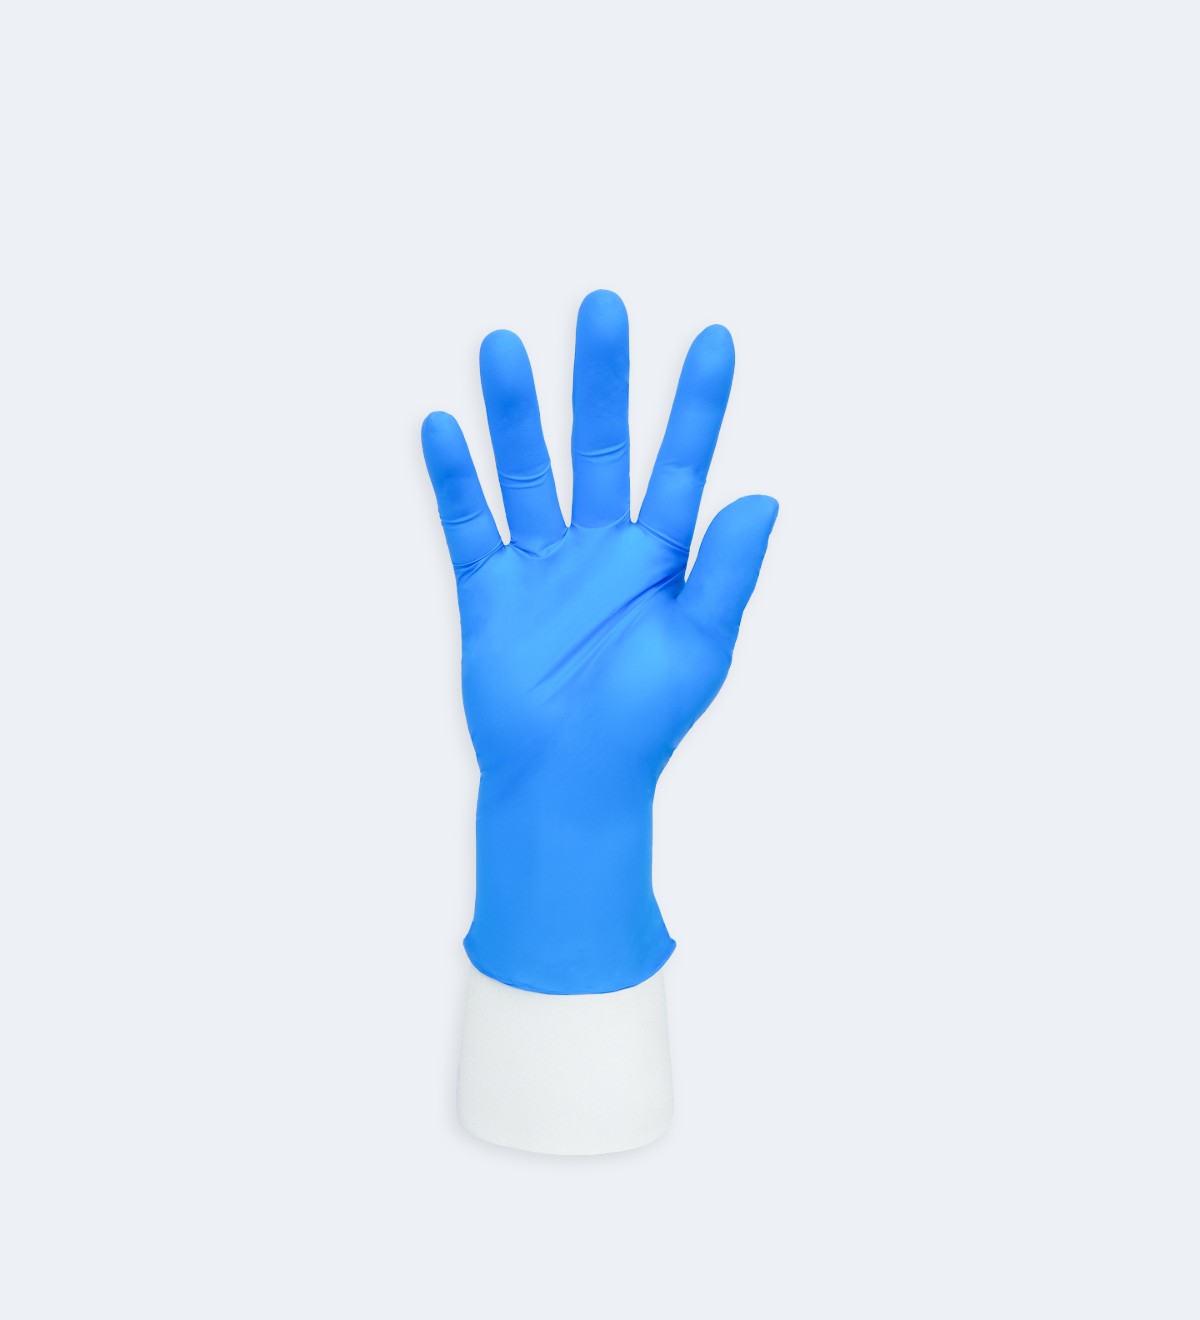 Disposable Nitrile Gloves are made of high-quality nitrile latex, which avoids the problem of latex allergy. 